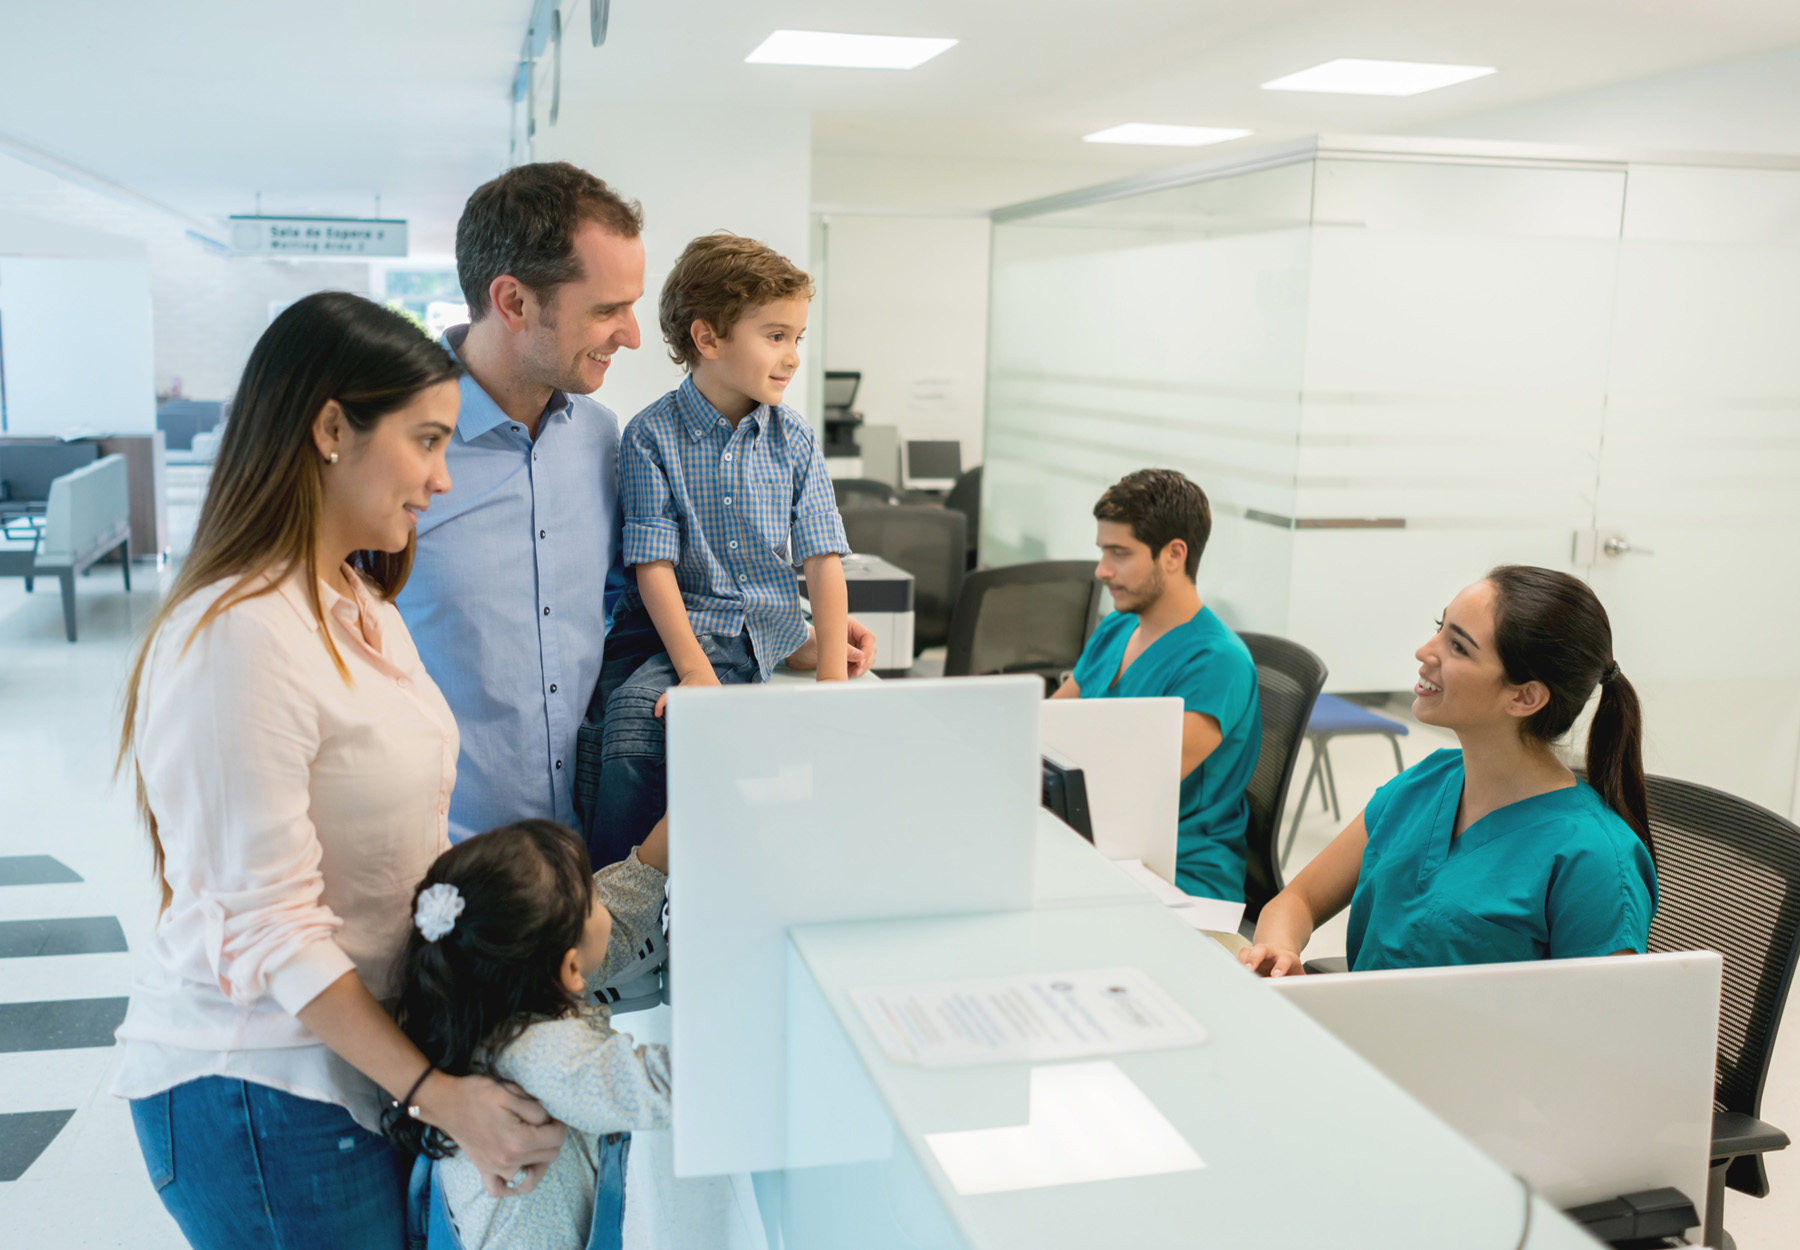 Family at front desk of hospital. Stock photo.